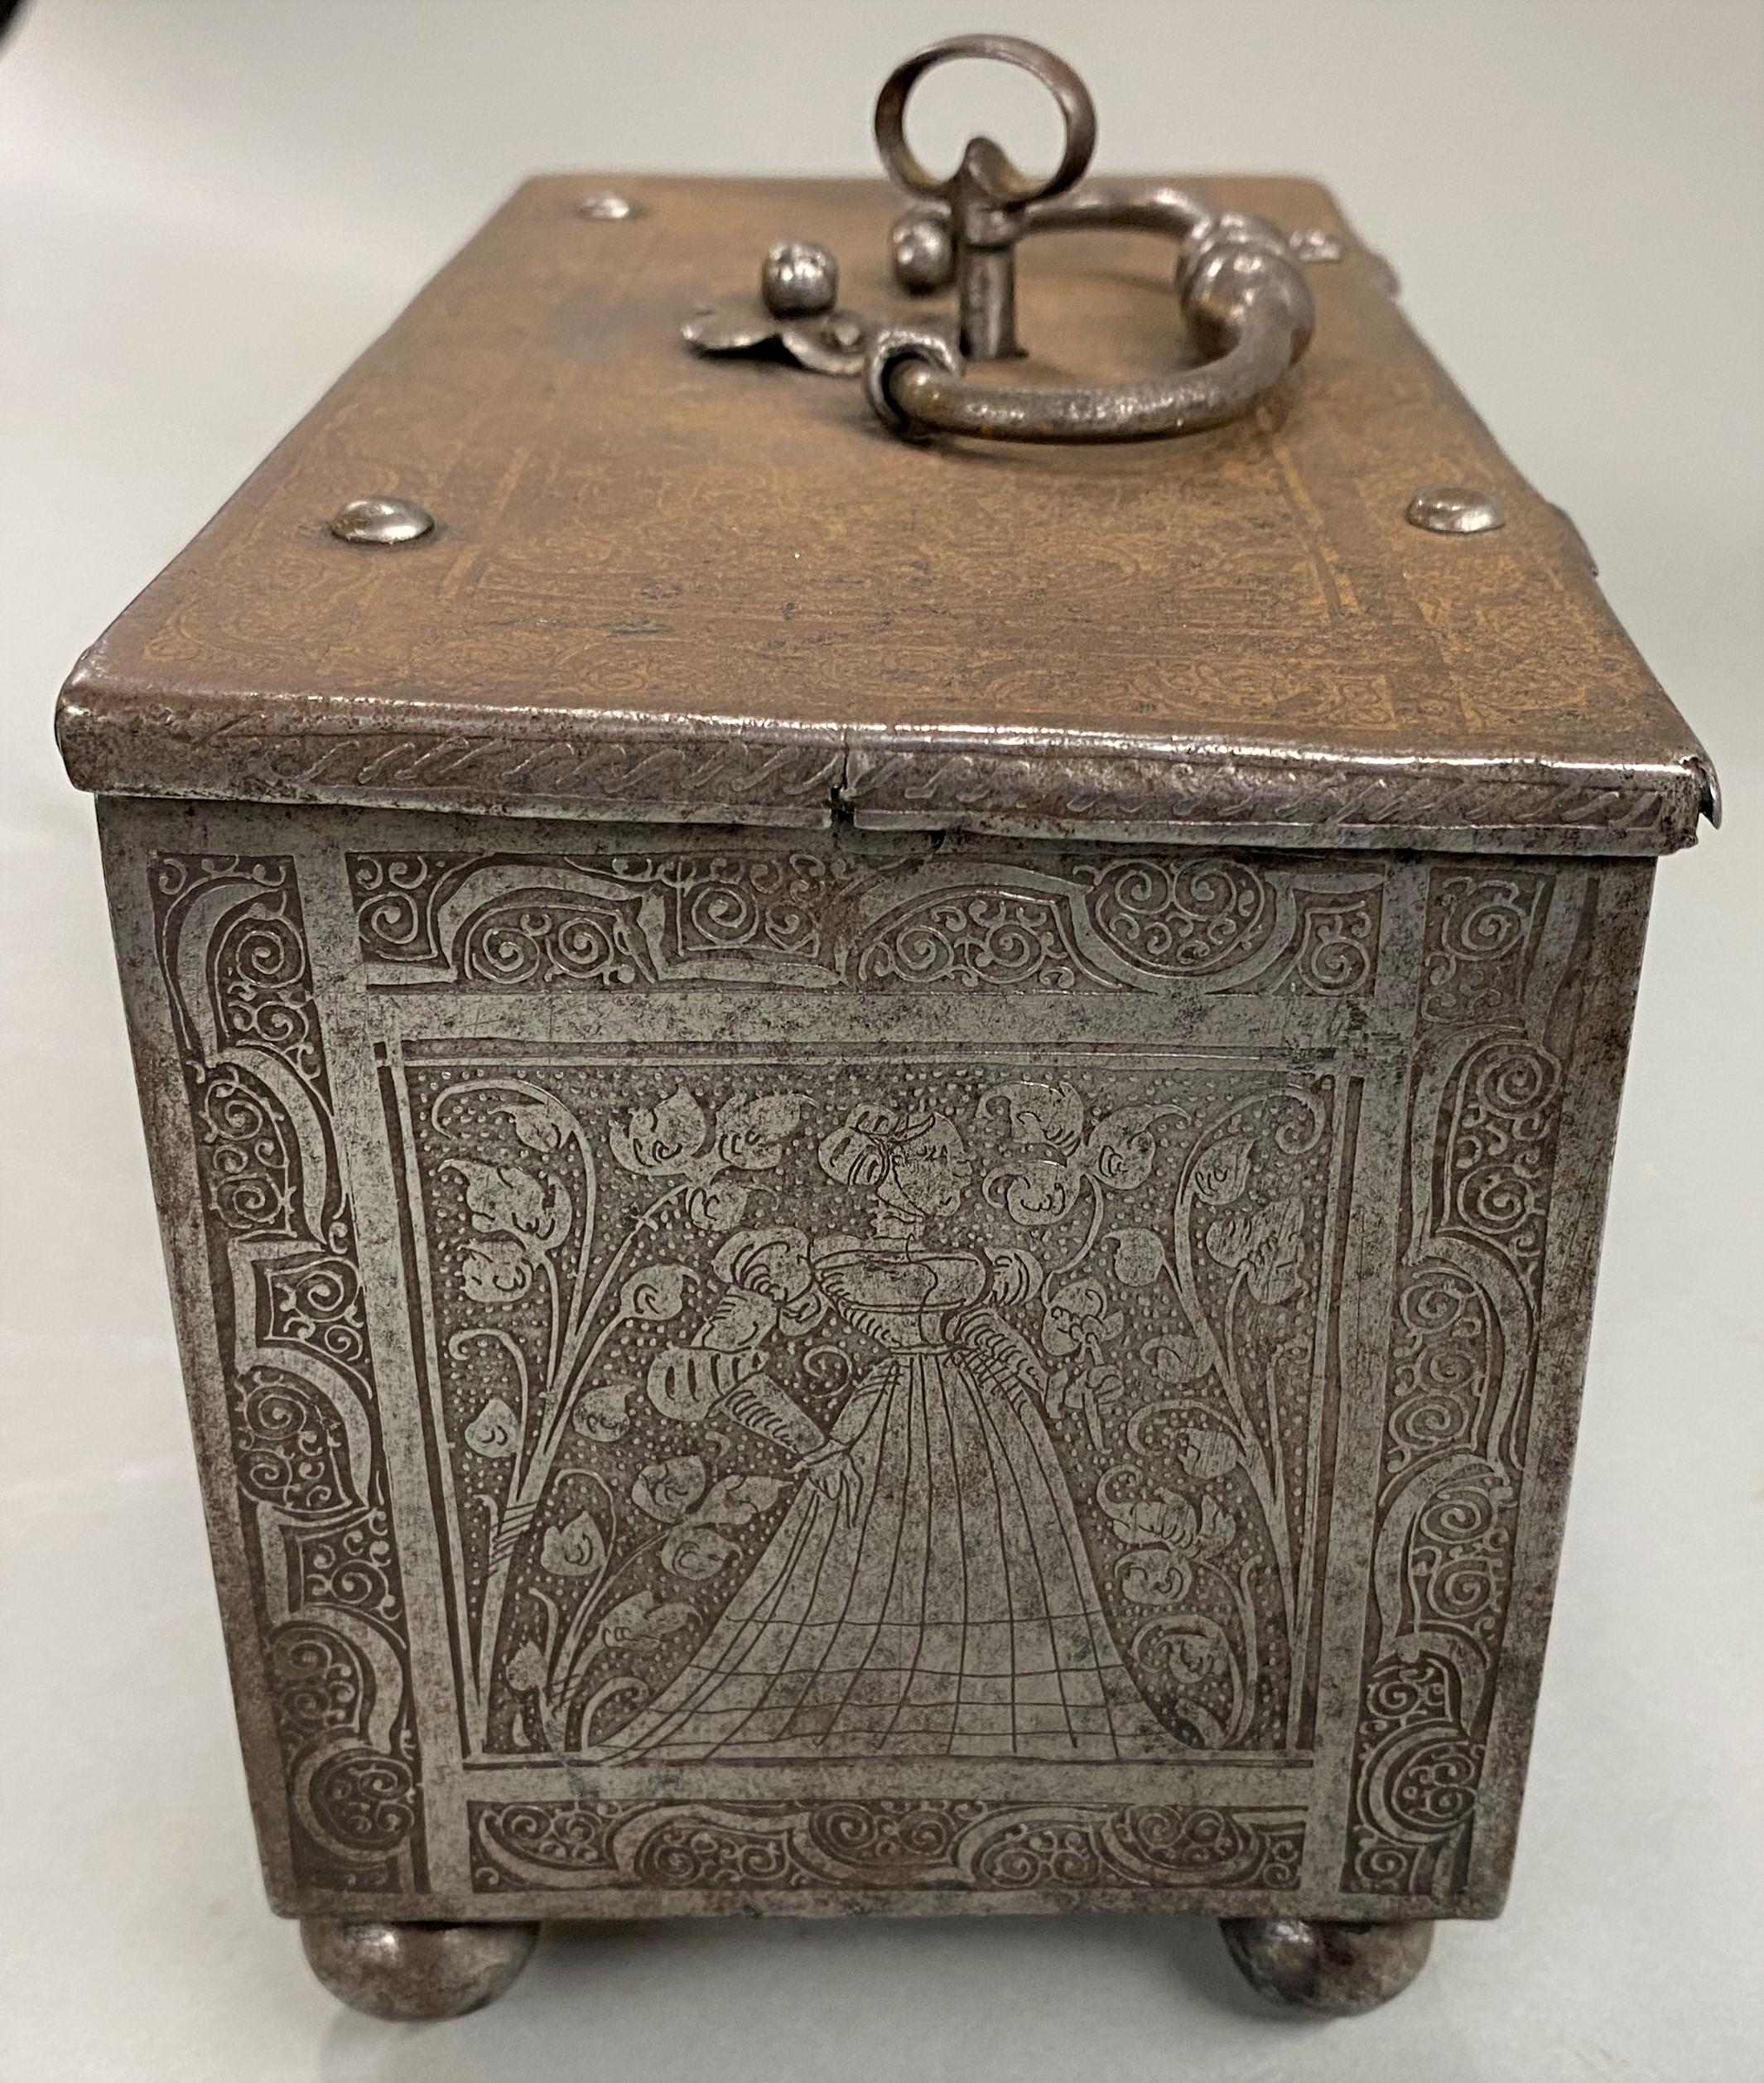 Forged Steel Engraved Nuremberg Money Chest or Cash Box circa 1600 For Sale